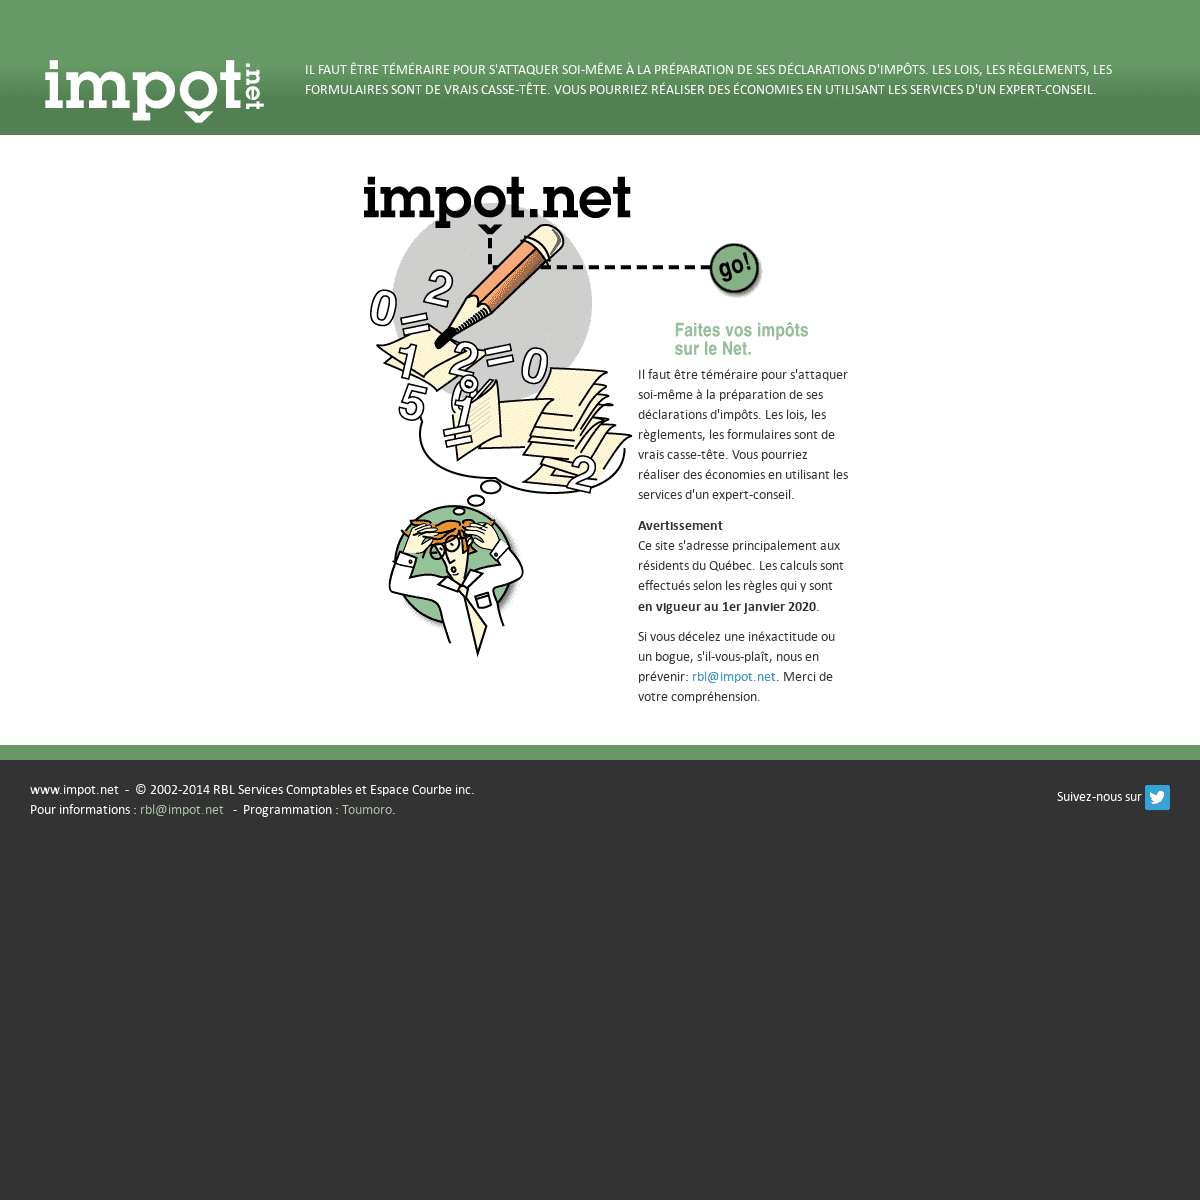 A complete backup of impot.net